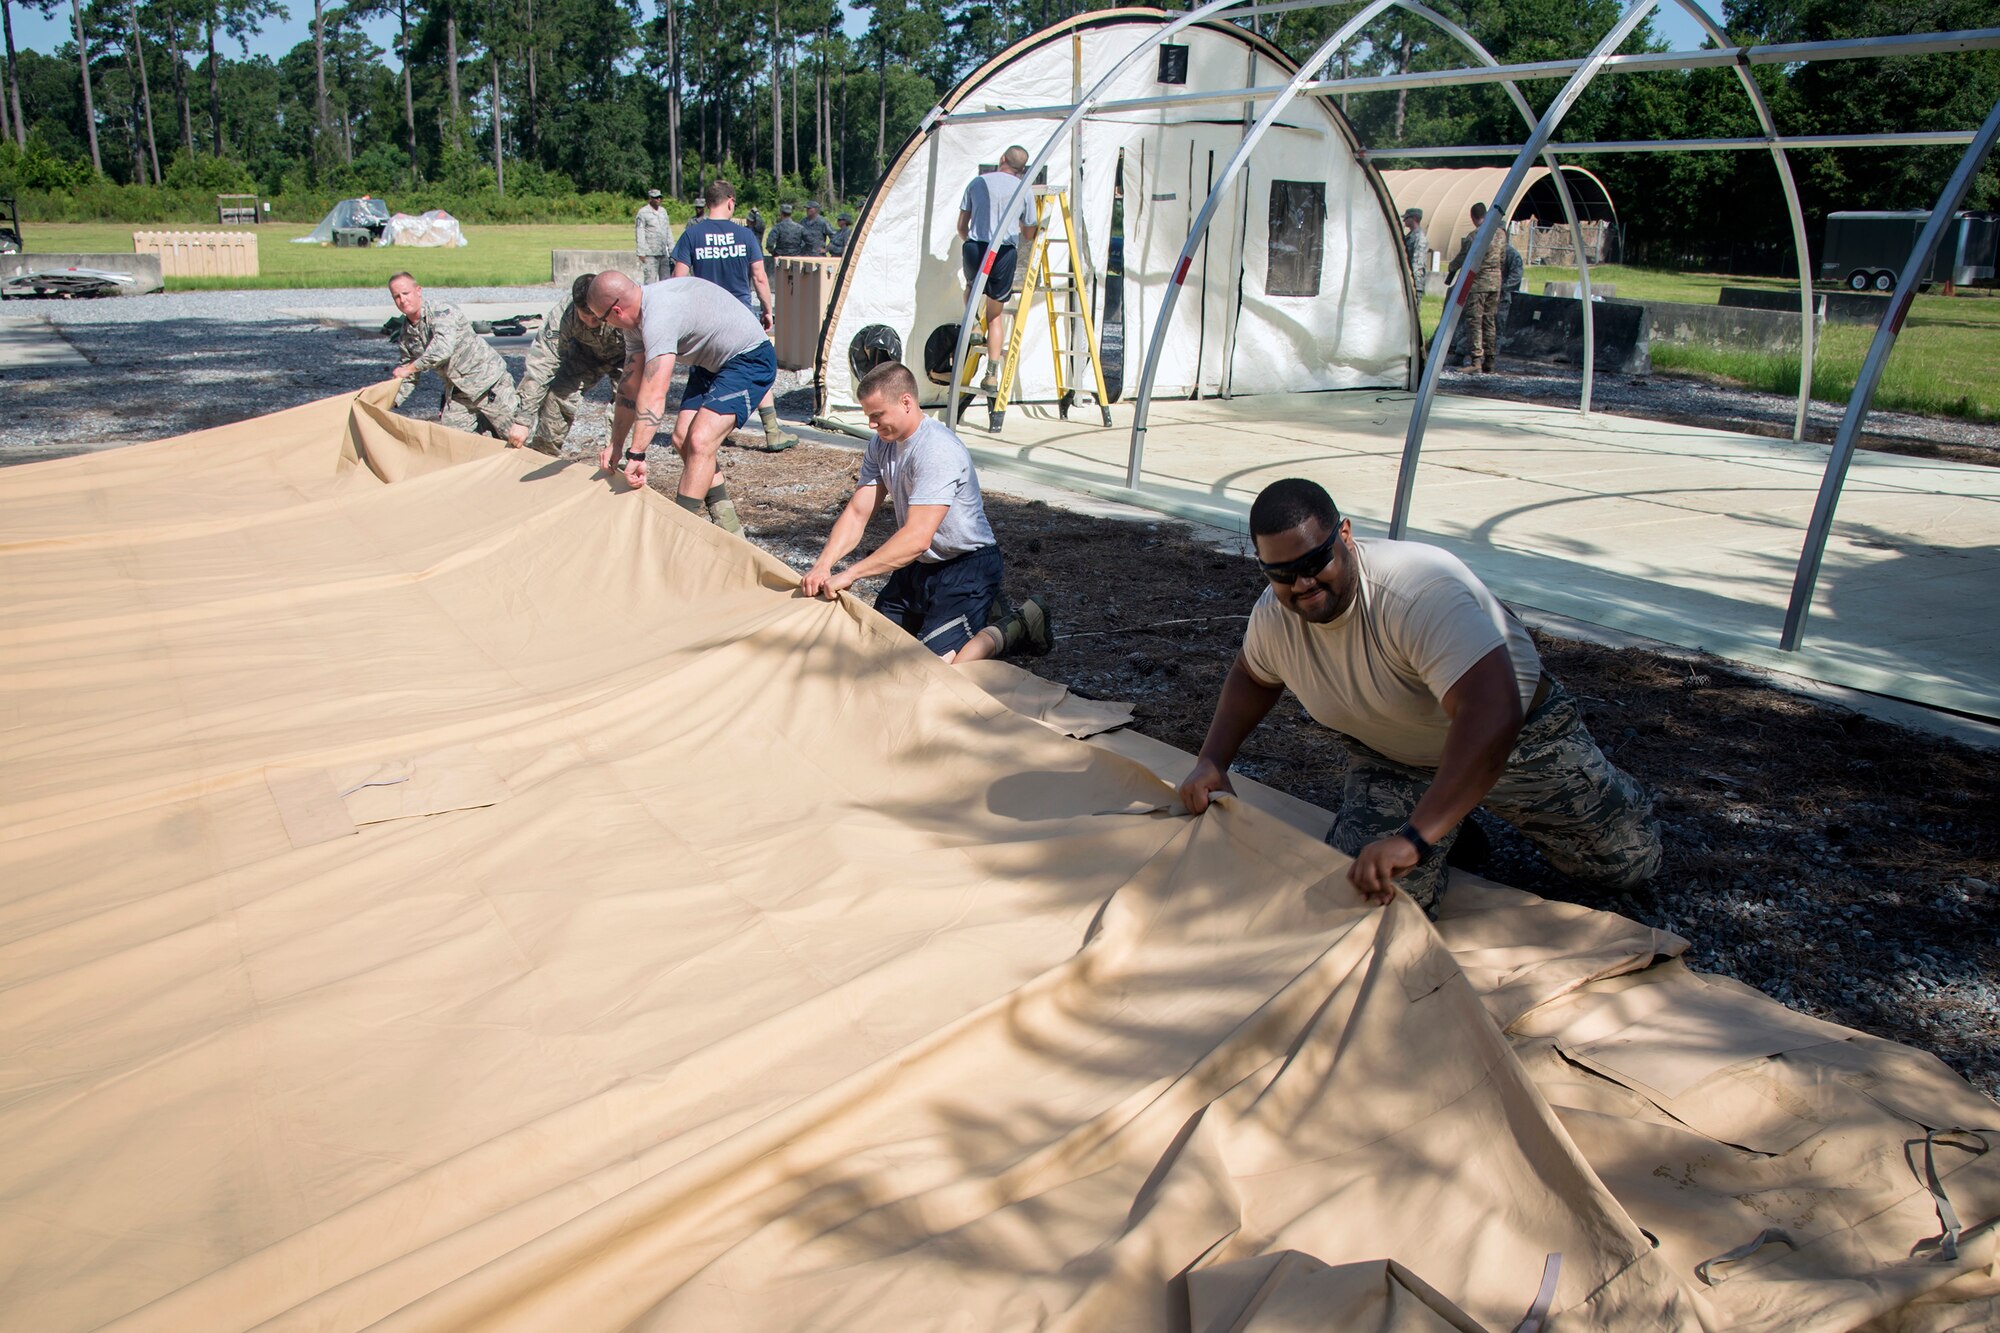 Airmen from the 23d Civil Engineer Squadron, fold up a tarp during a chemical, Biological, Radiological, Nuclear and Explosive (CBRNE) Olympics, June 21, 2018, at Moody Air Force Base, Ga.  Moody’s first CBRNE Olympics, were held to further Airmen’s overall knowledge on all of the aspects of CBRNE through a new method that was meant to establish a sense of competition and camaraderie. (U.S. Air Force photo by Airman 1st Class Eugene Oliver)